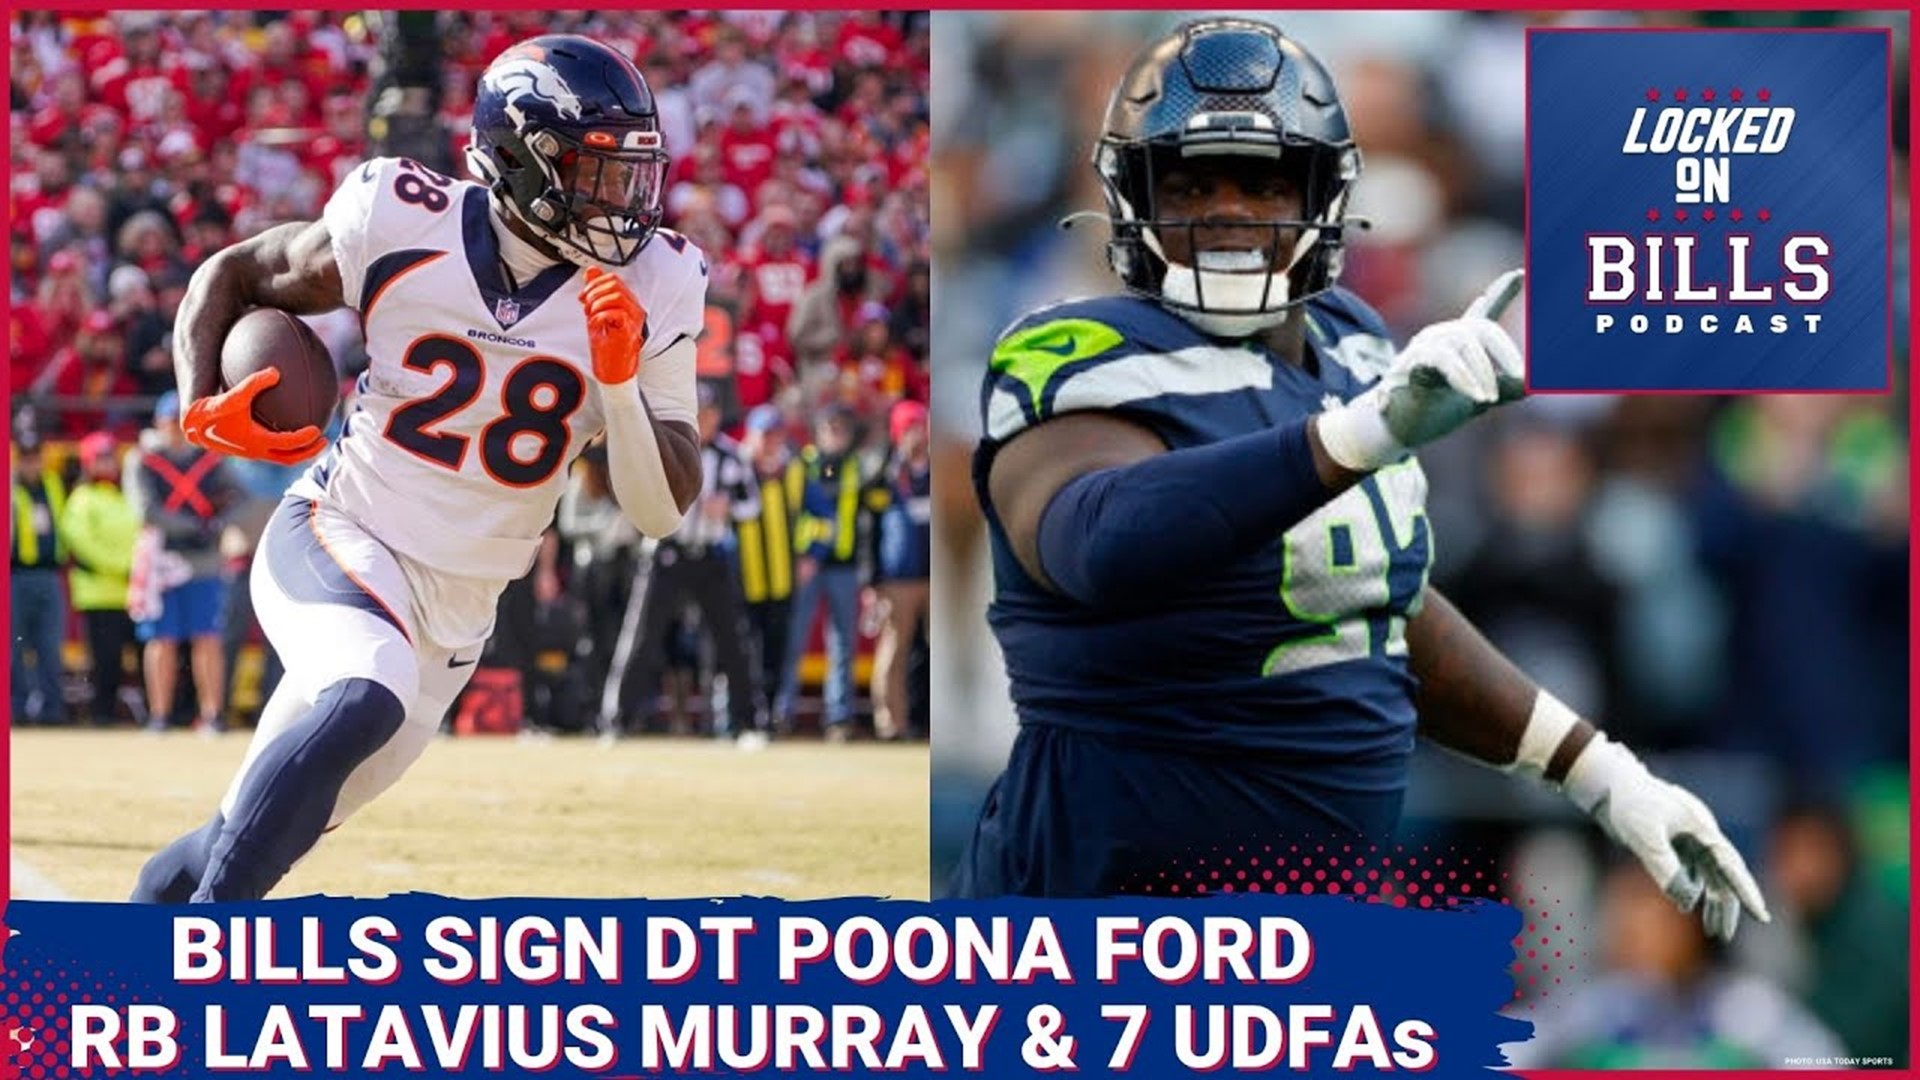 Buffalo Bills sign DT Poona Ford, RB Latavius Murray and 7